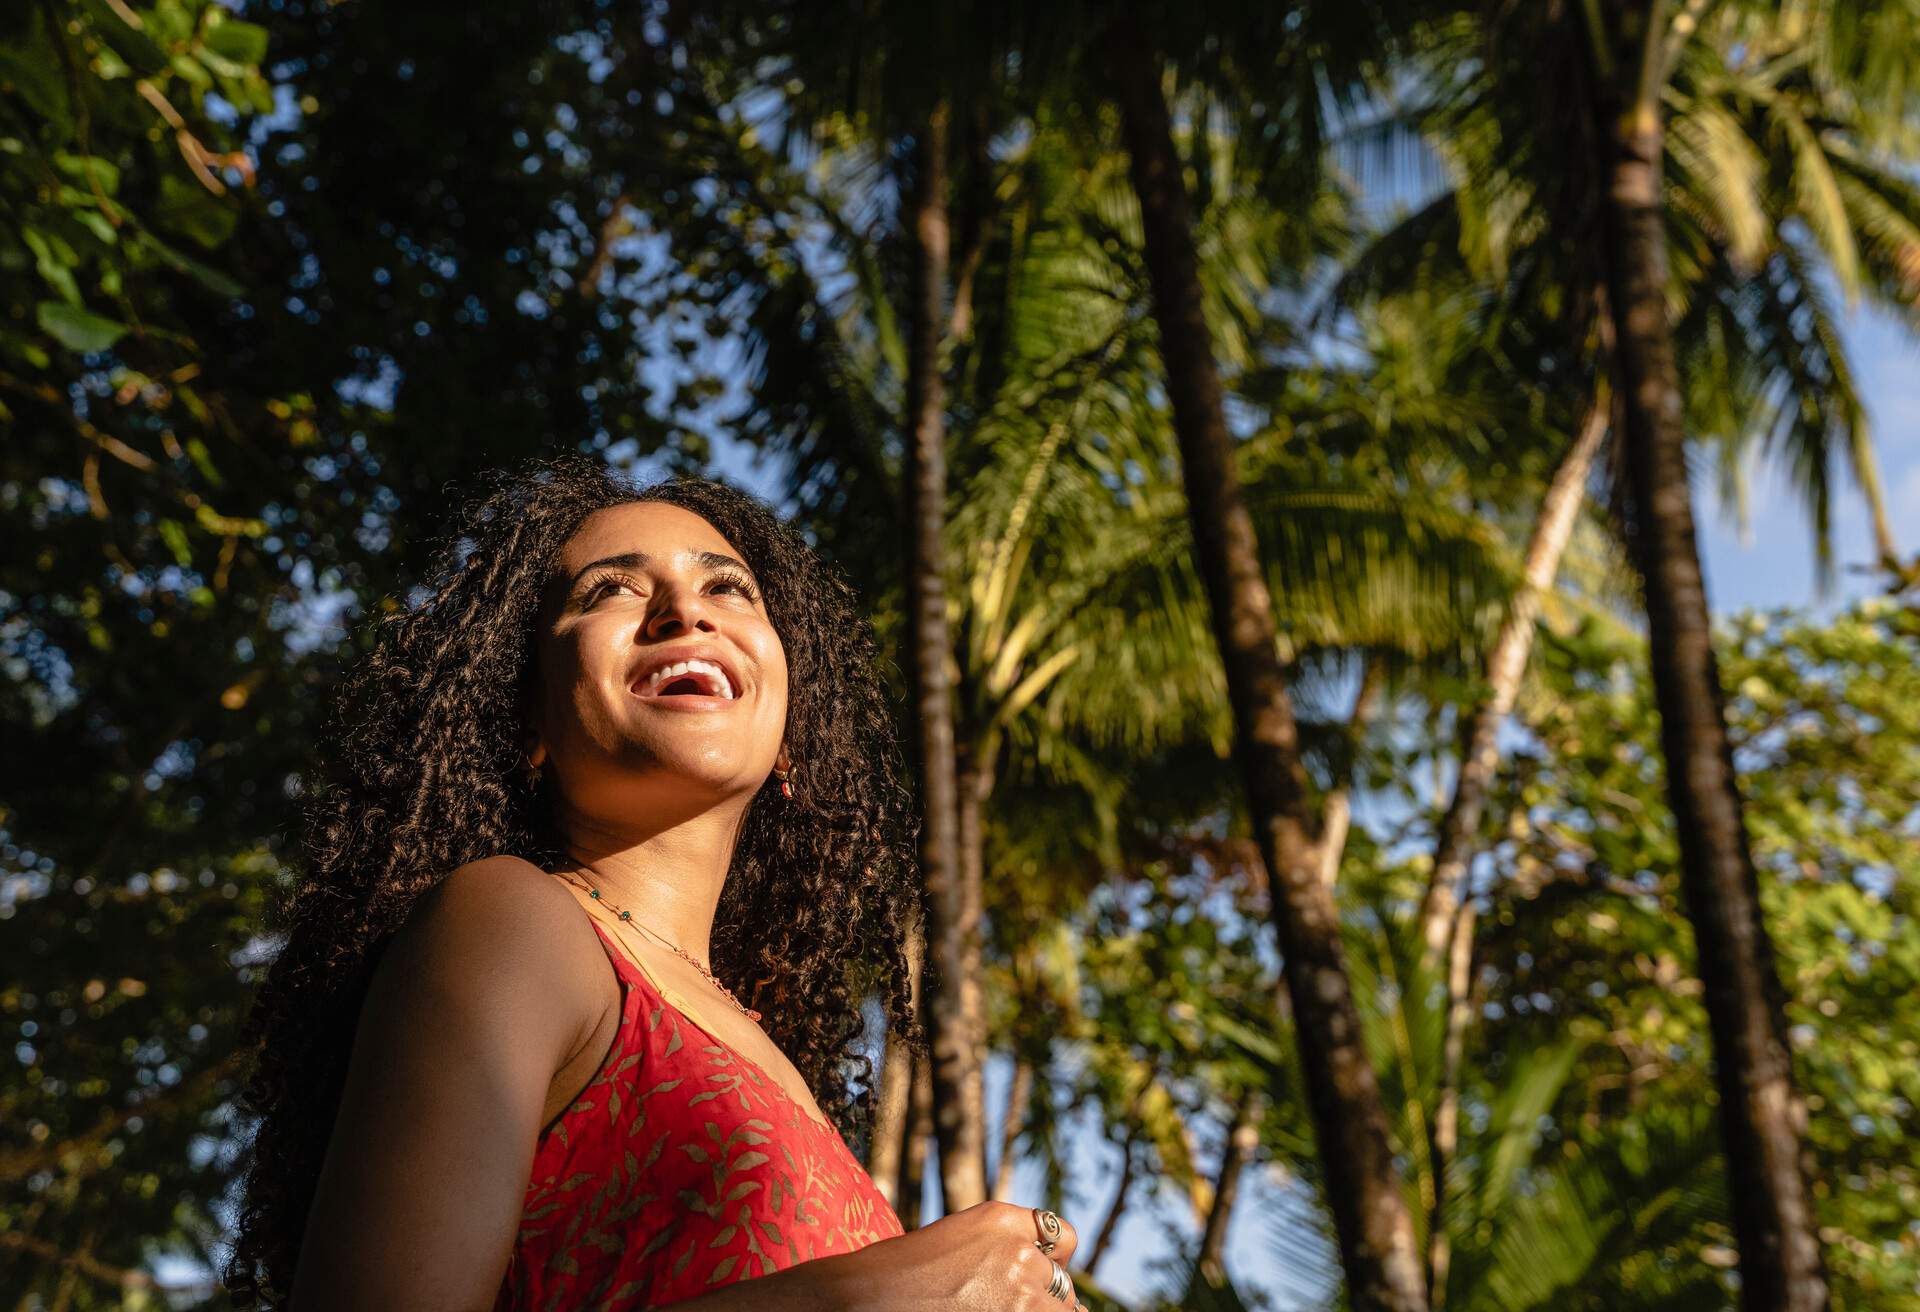 Portrait with copy space of a smiling woman looking ahead next to palm trees in a sunny day